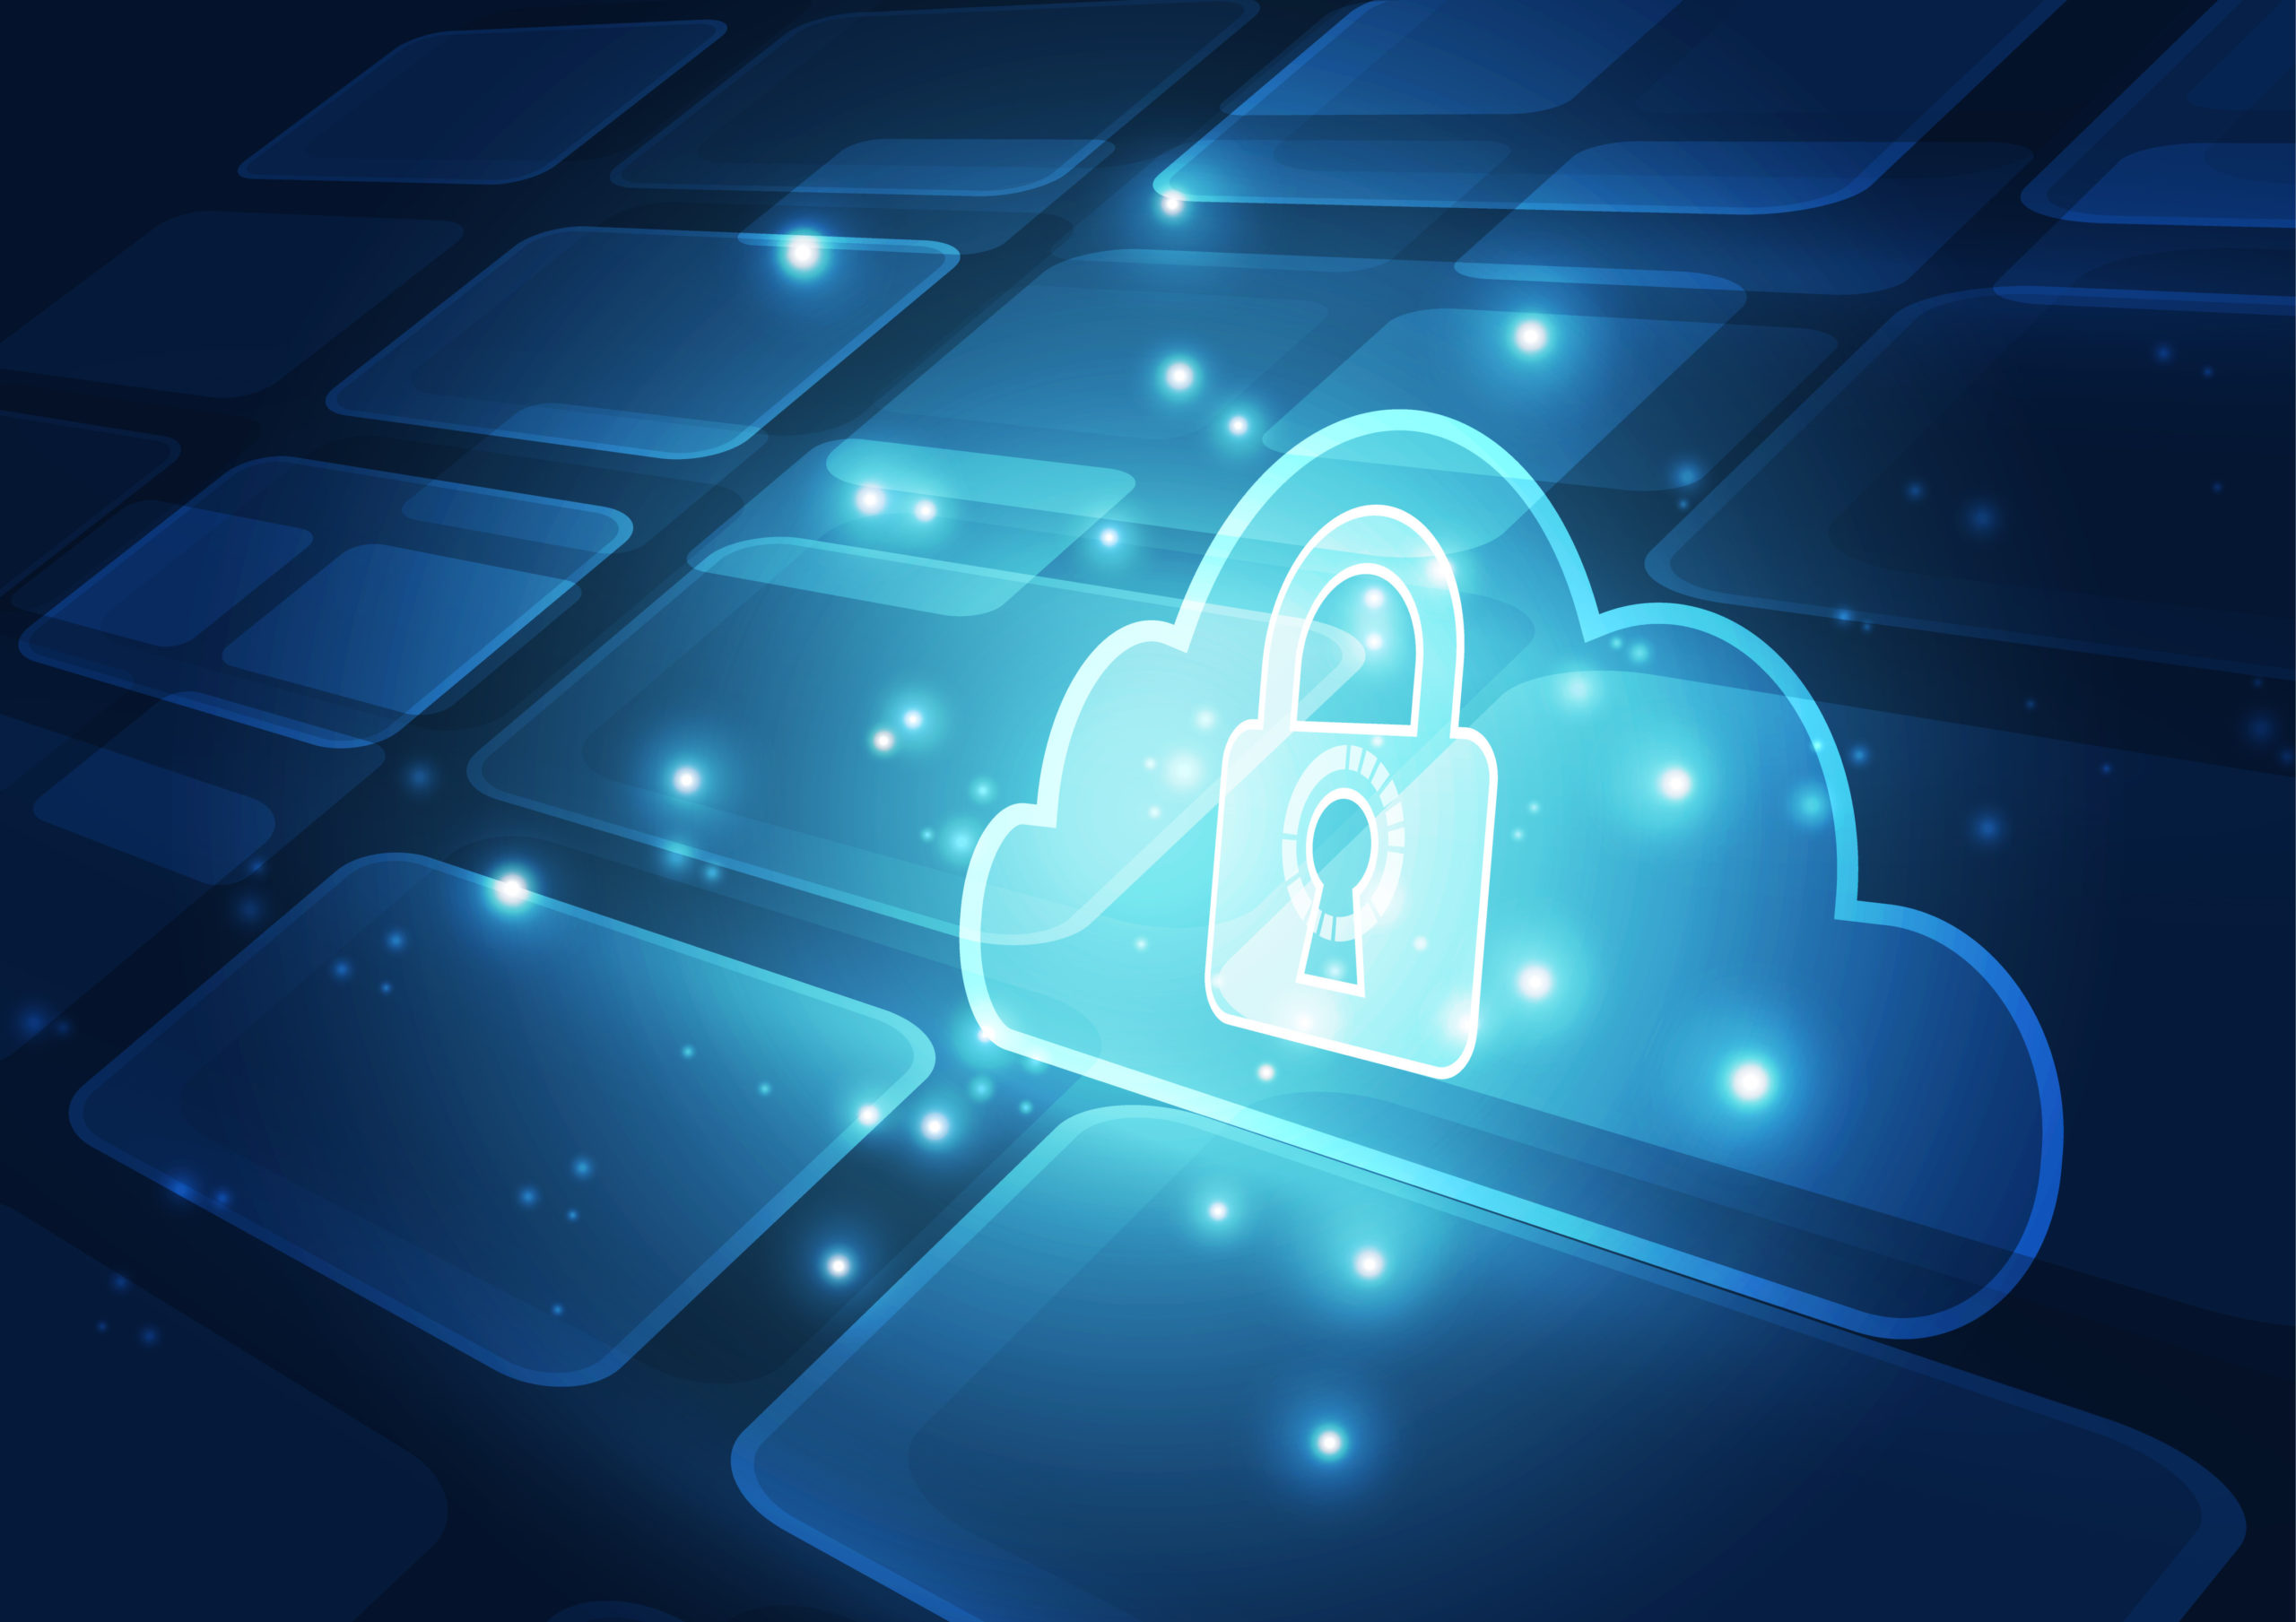 Key considerations for a secure cloud infrastructure